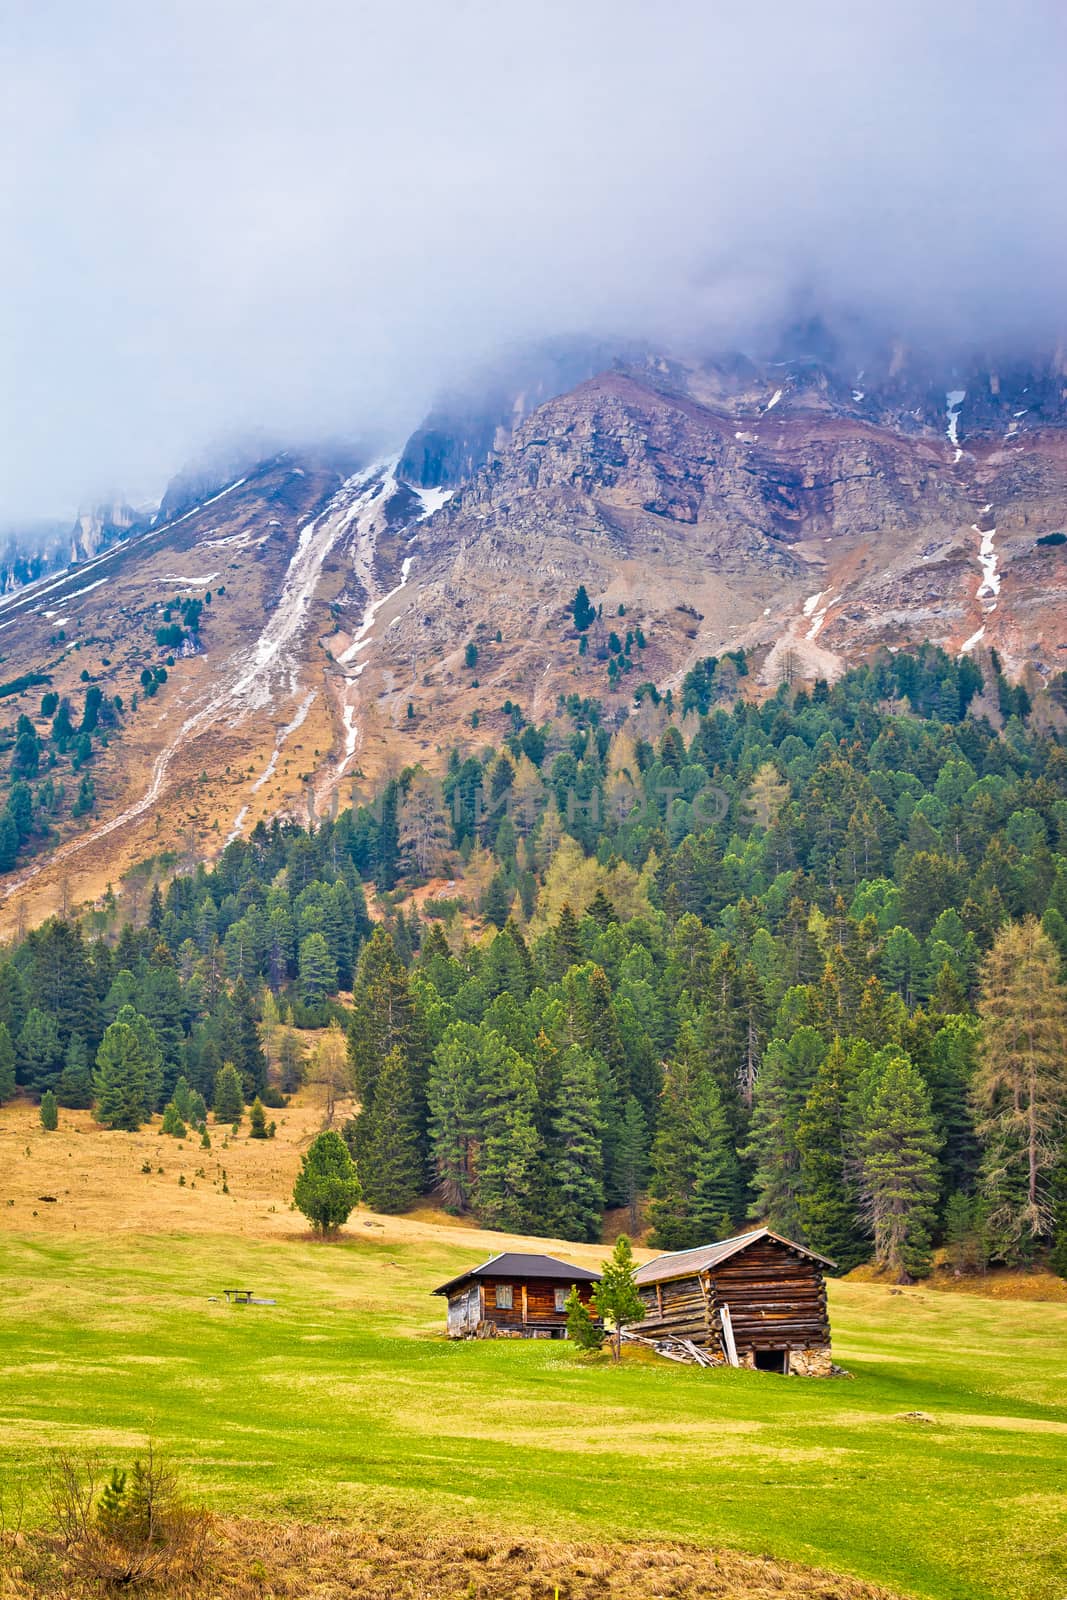 Alpine peak in fog and mountain hut vertical view, Gislergruppe mountains in Alps, South Tyrol, Italy